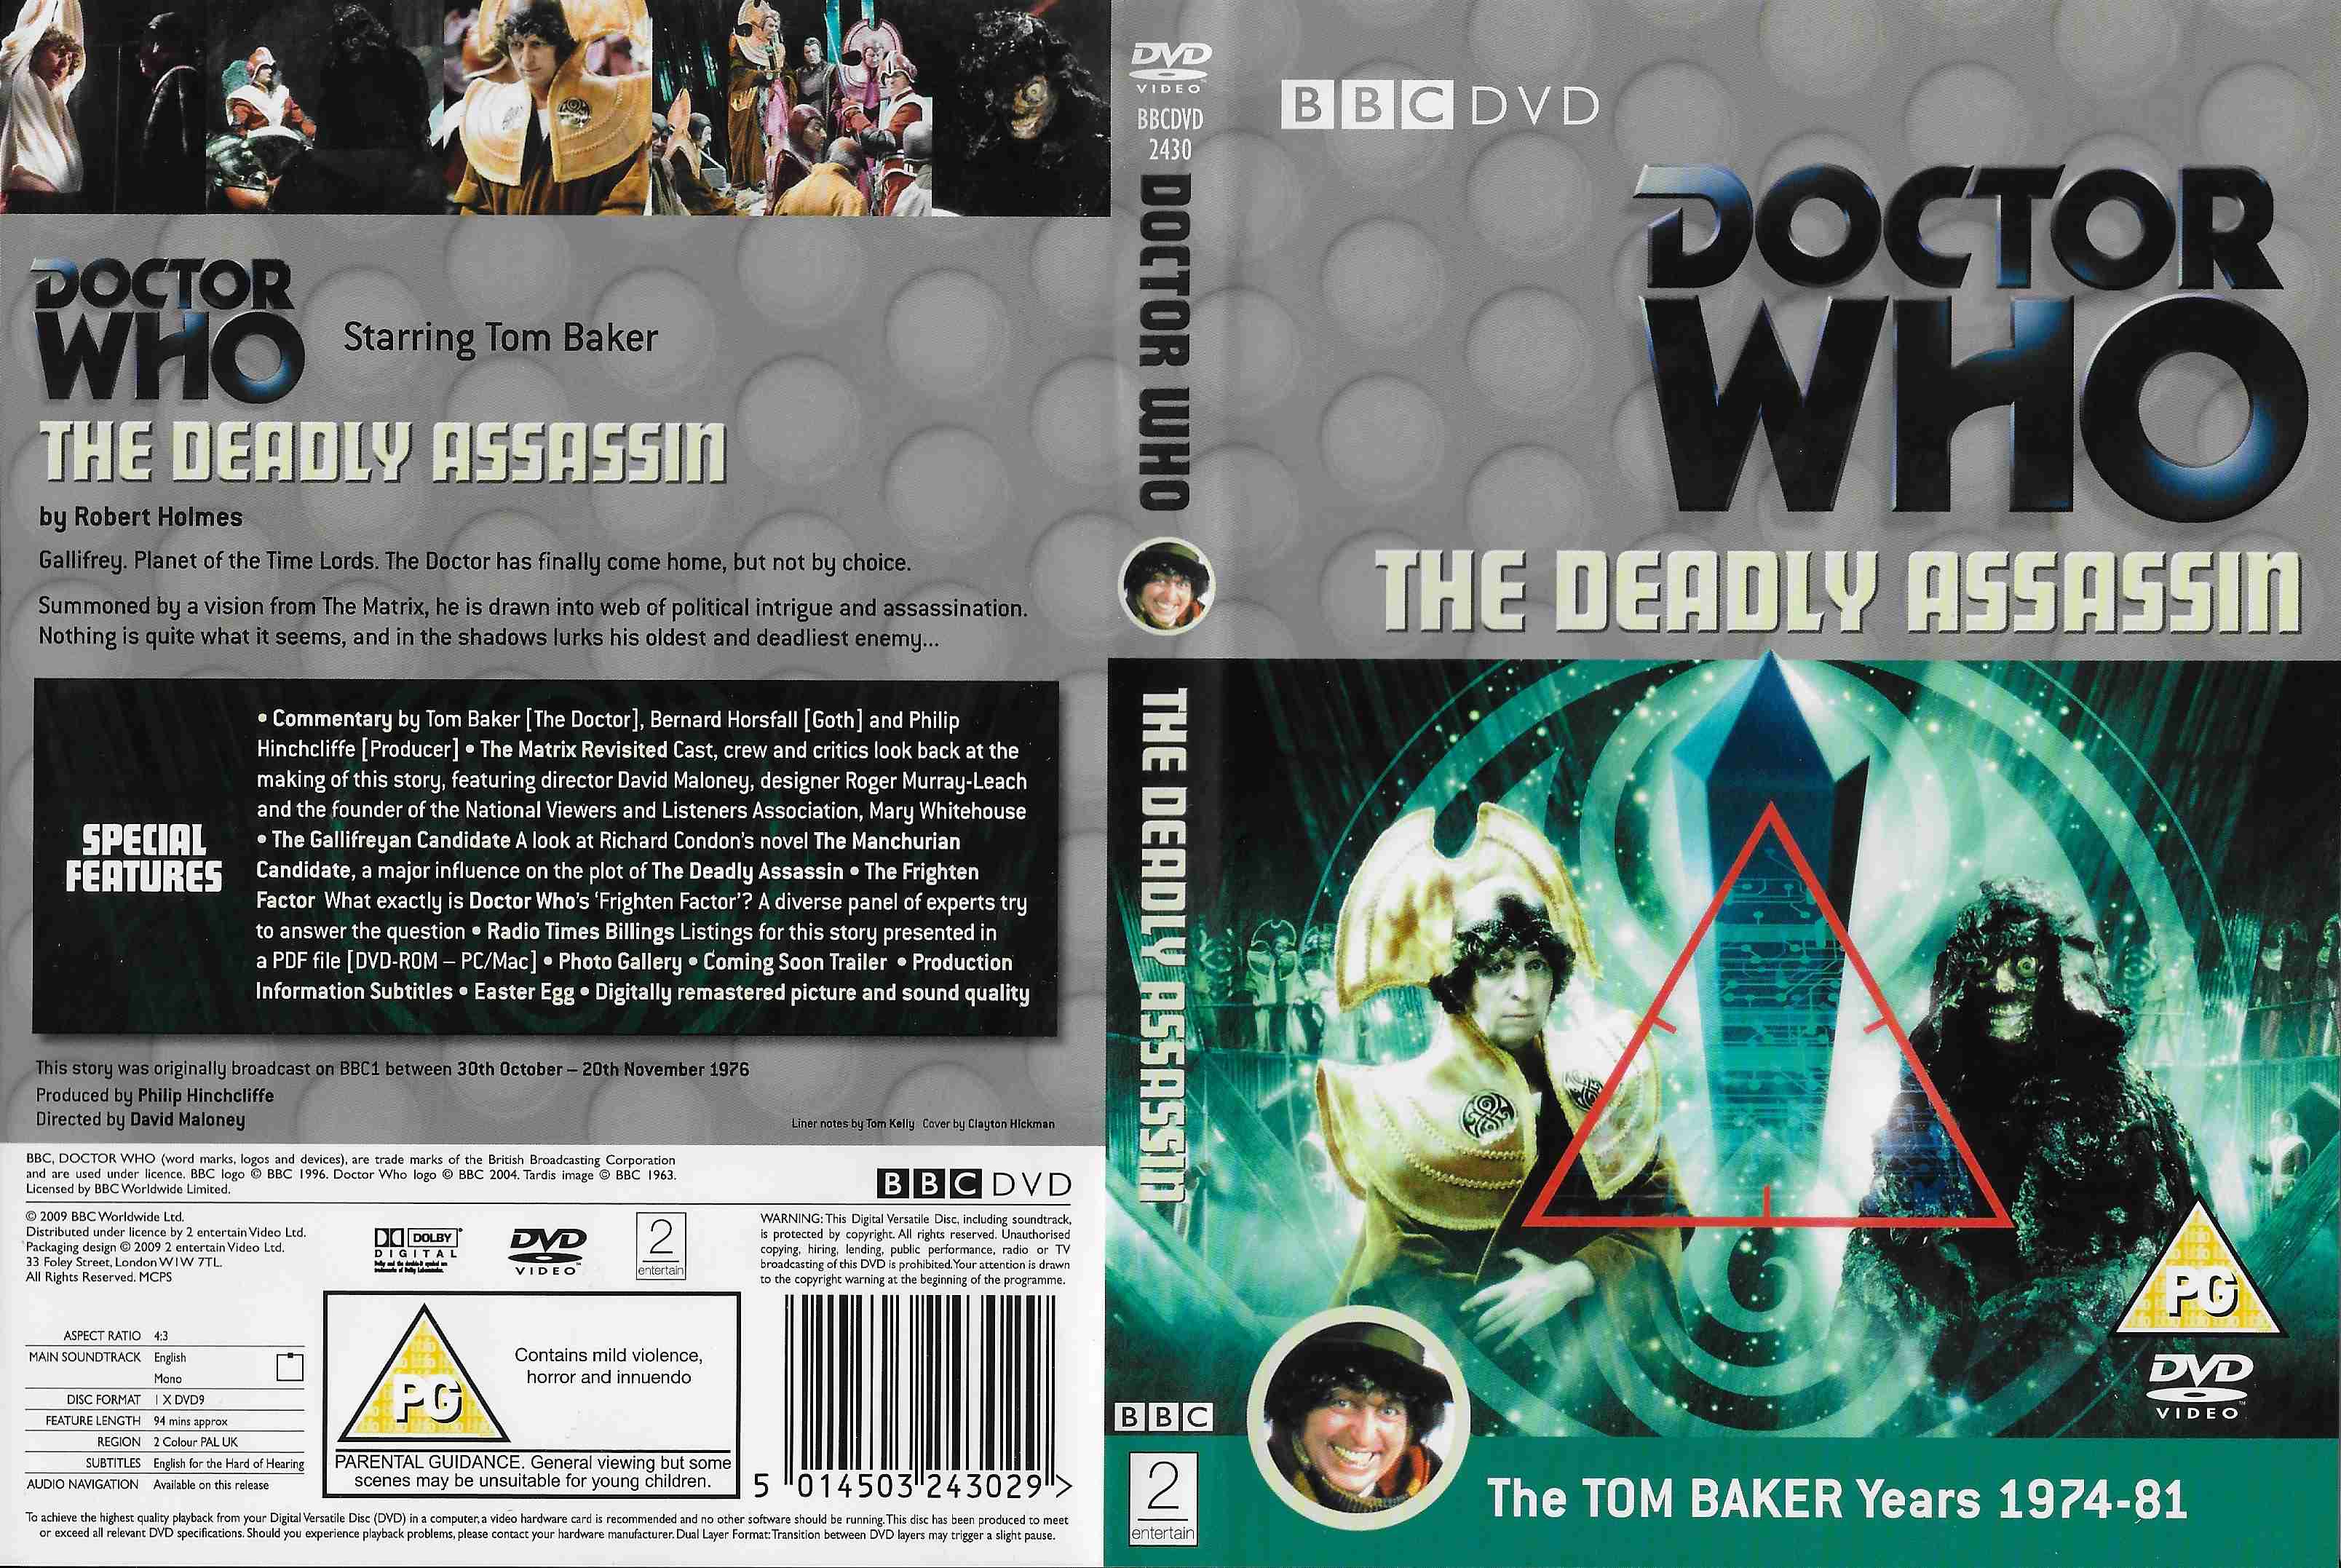 Picture of BBCDVD 2430 Doctor Who - The deadly assassin by artist Robert Holmes from the BBC records and Tapes library